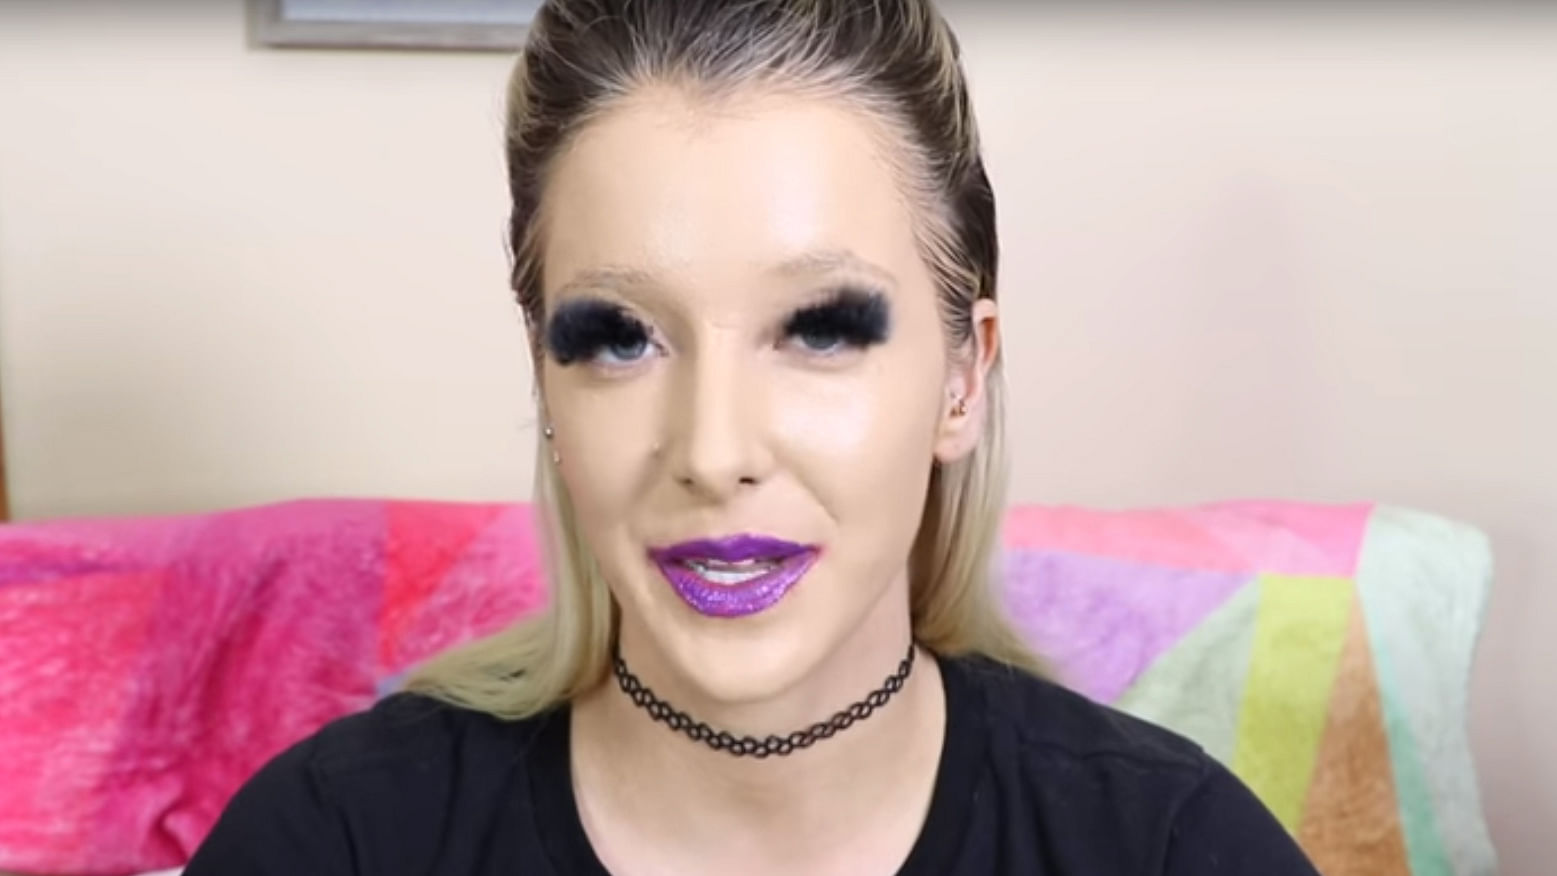 ‘100 layers of makeup’ is a horrifying trend. (Photo Courtesy: YouTube screenshot)